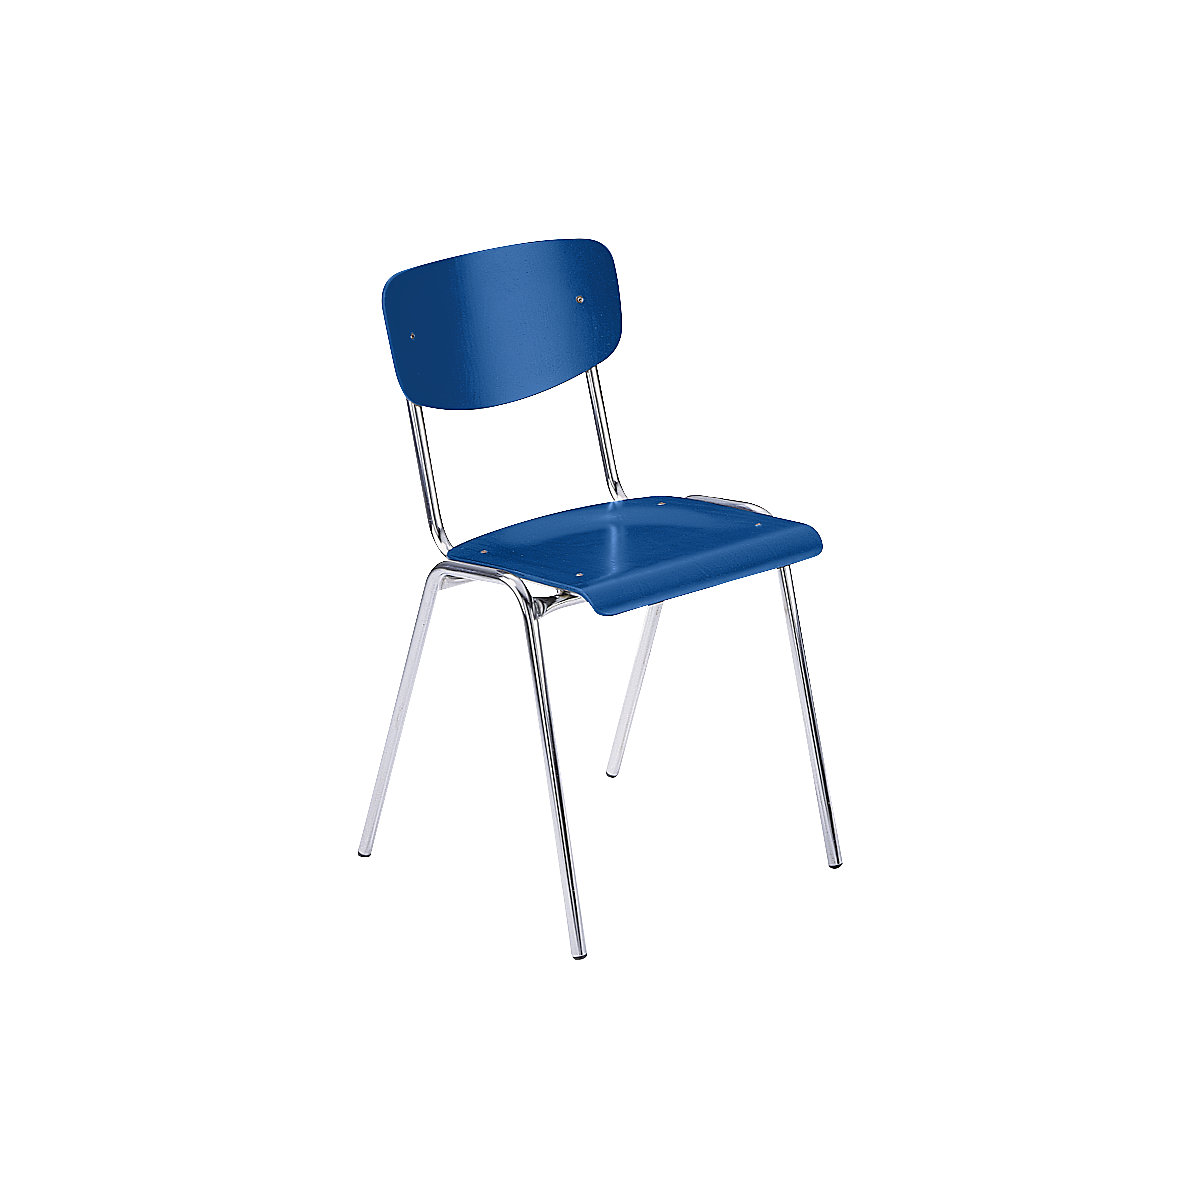 CLASSIC stacking chair